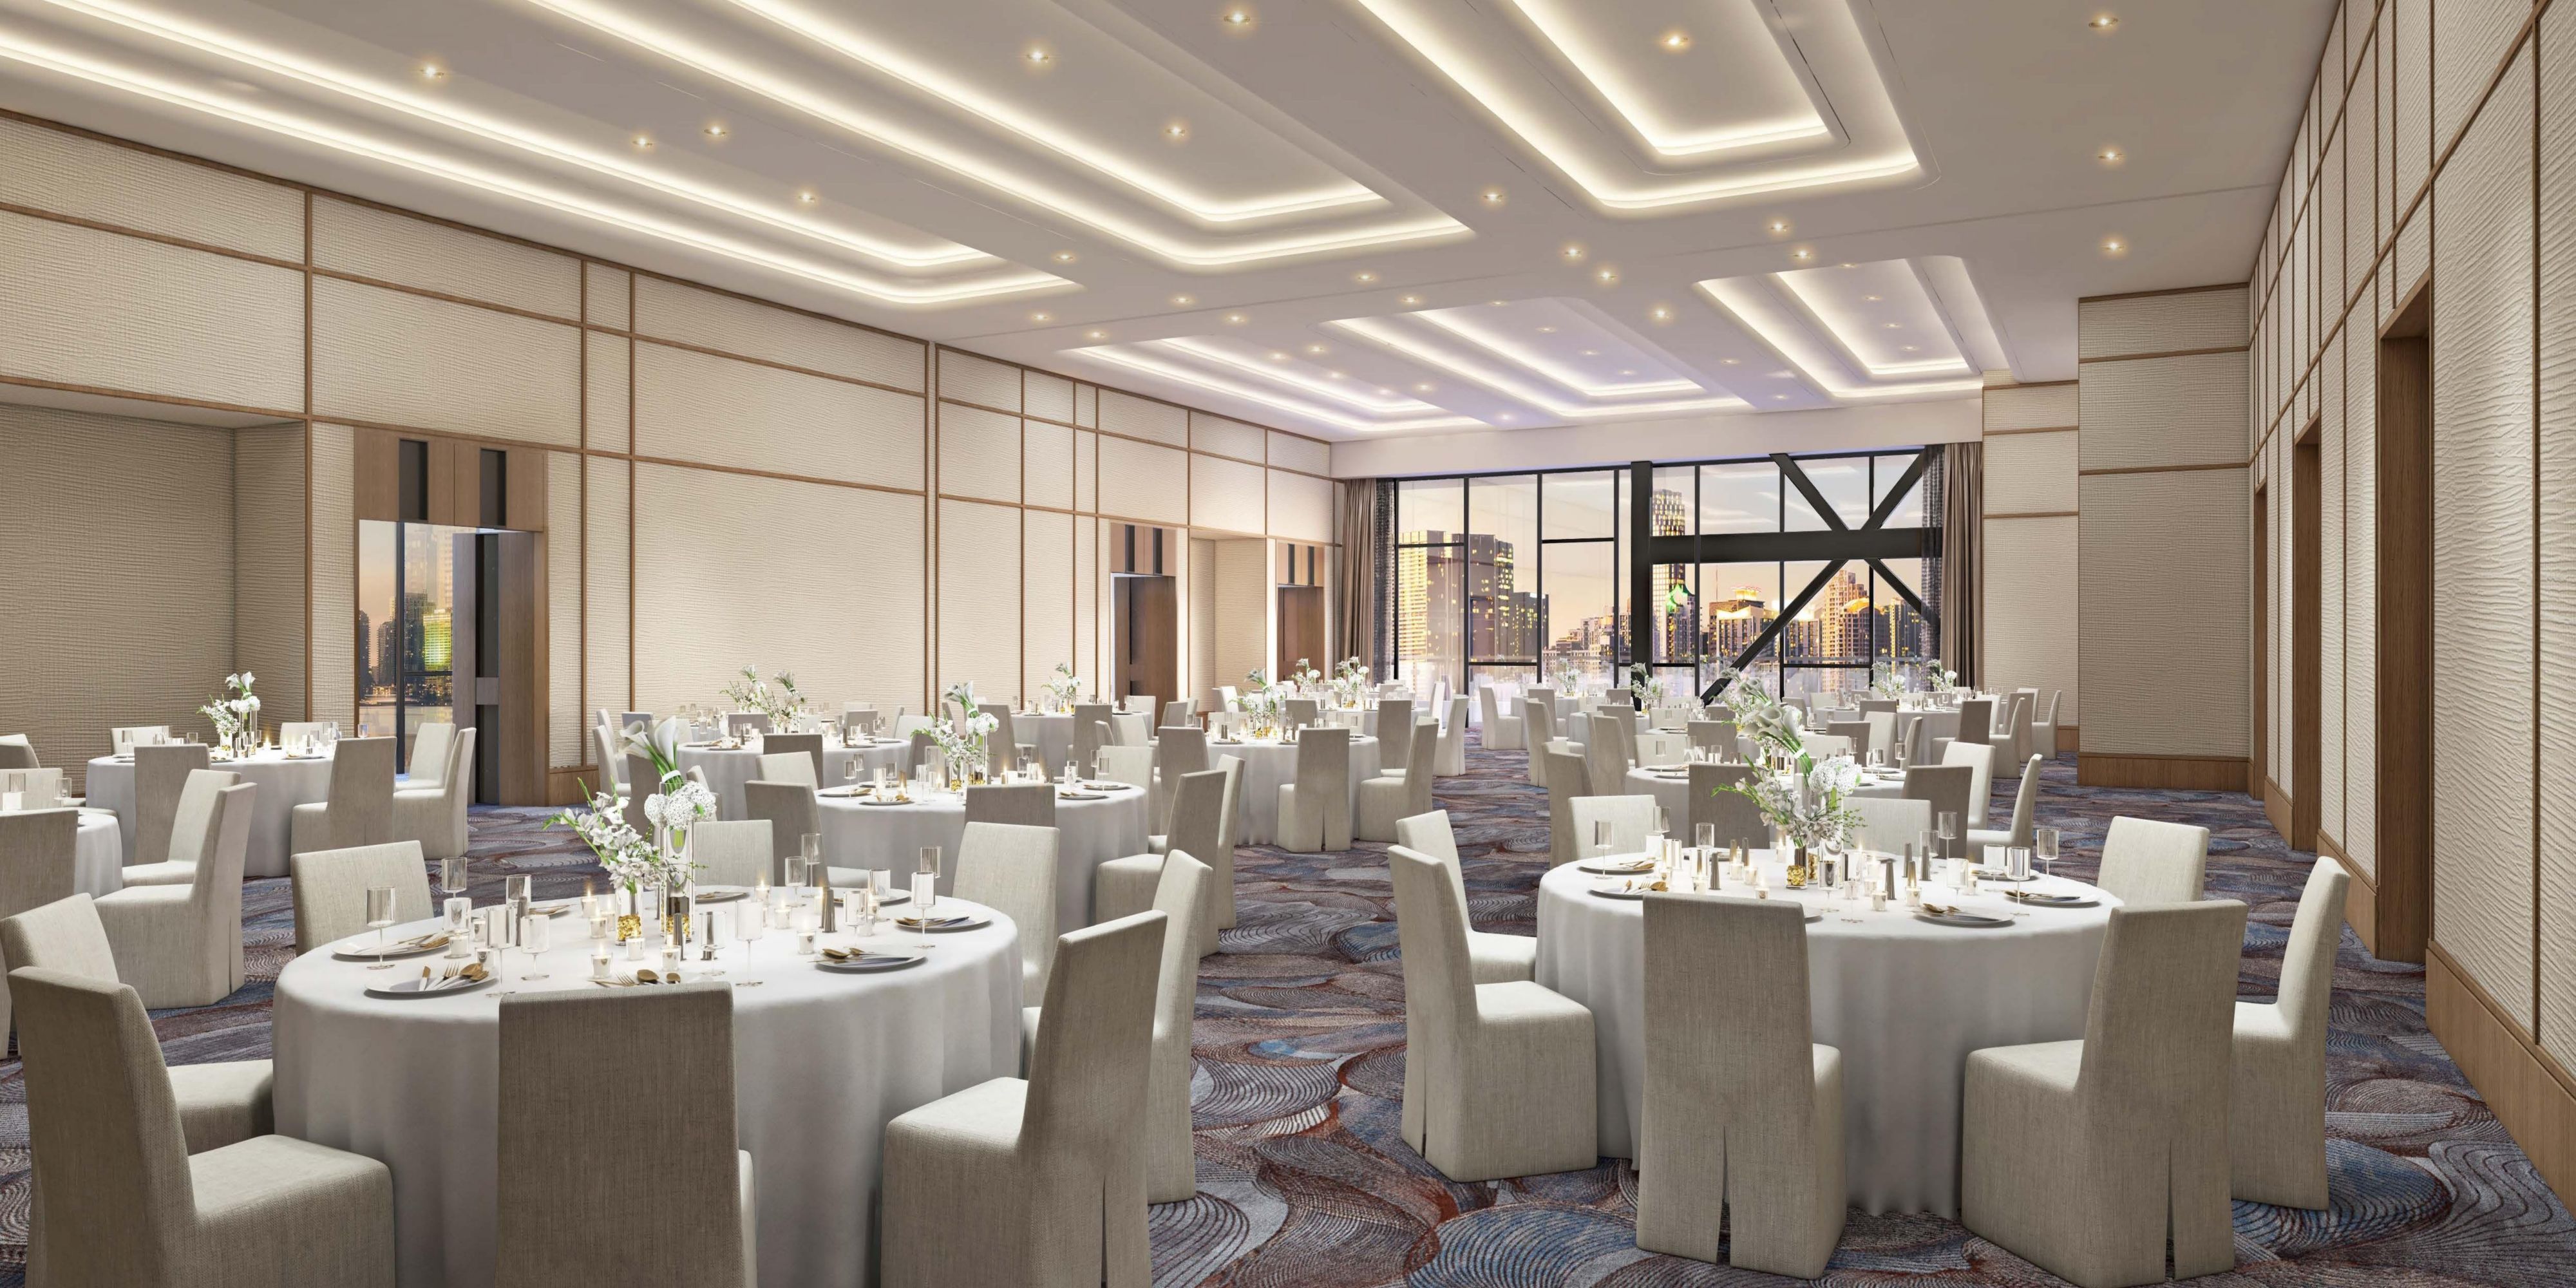 Plan your Bellevue event with elegance and sophistication at our hotel that offers 12,000+ sq ft of flexible meeting and event space with refined décor and the latest audio and tech capabilities including a 4,200 sq ft Grand Ballroom for 300 guests, a Junior Ballroom, and versatile breakout rooms and boardrooms.